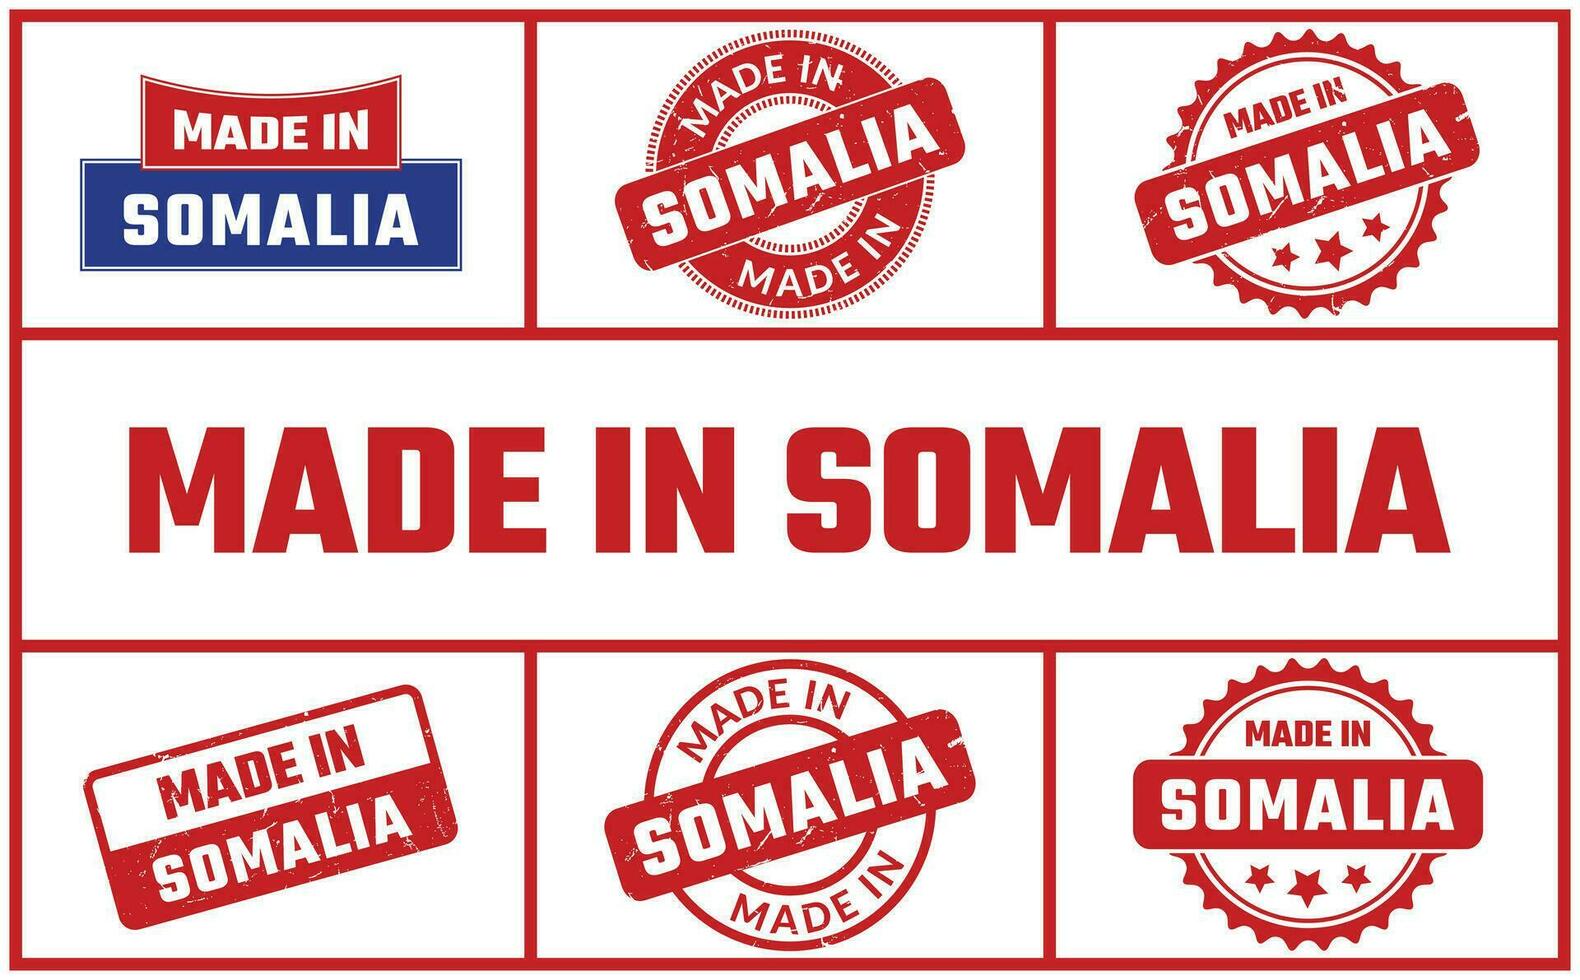 Made In Somalia Rubber Stamp Set vector